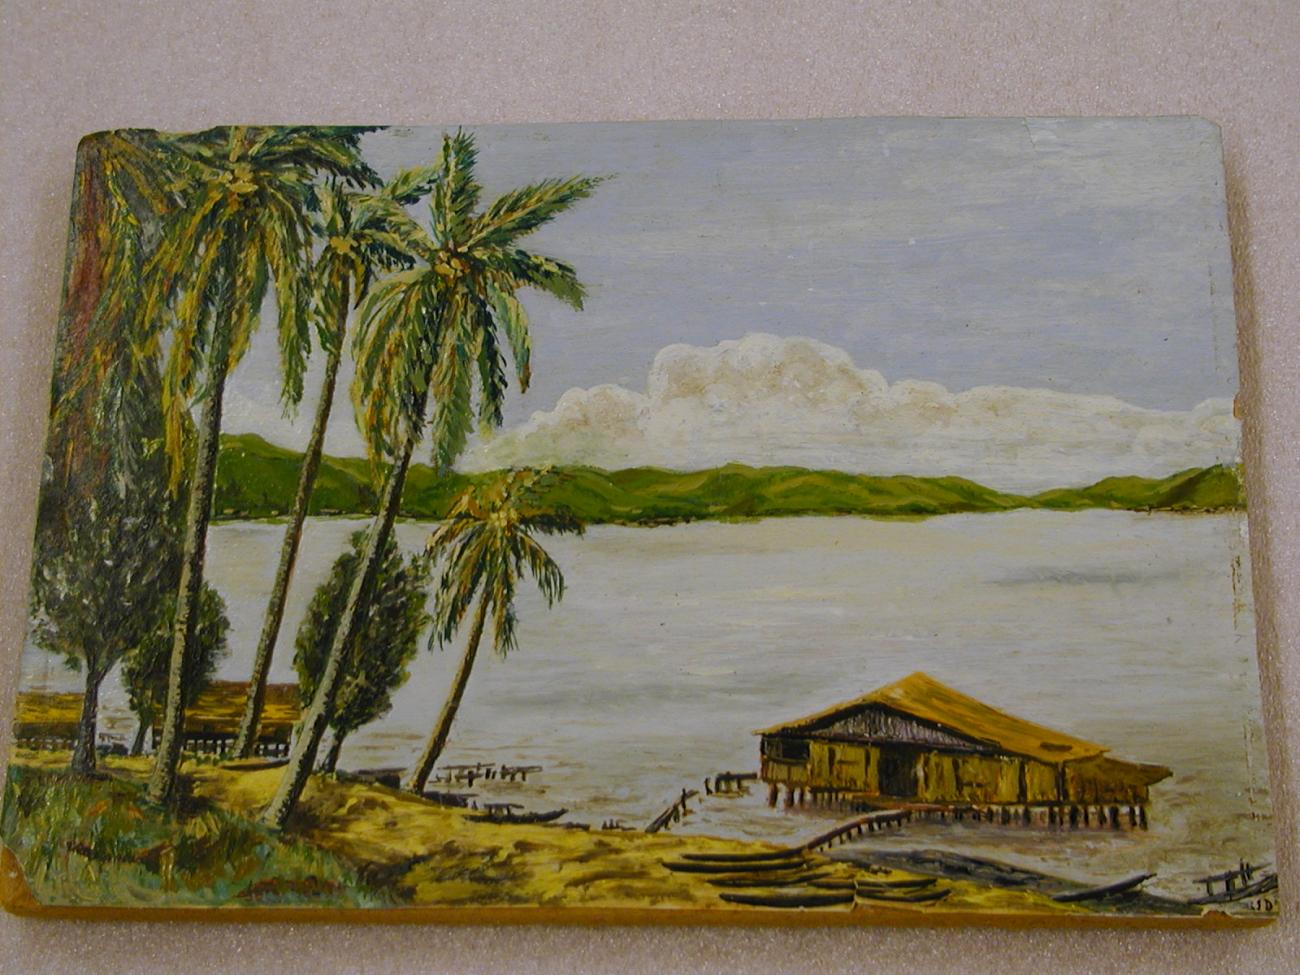 BD/8/10 - 
landscape with palm trees on water
